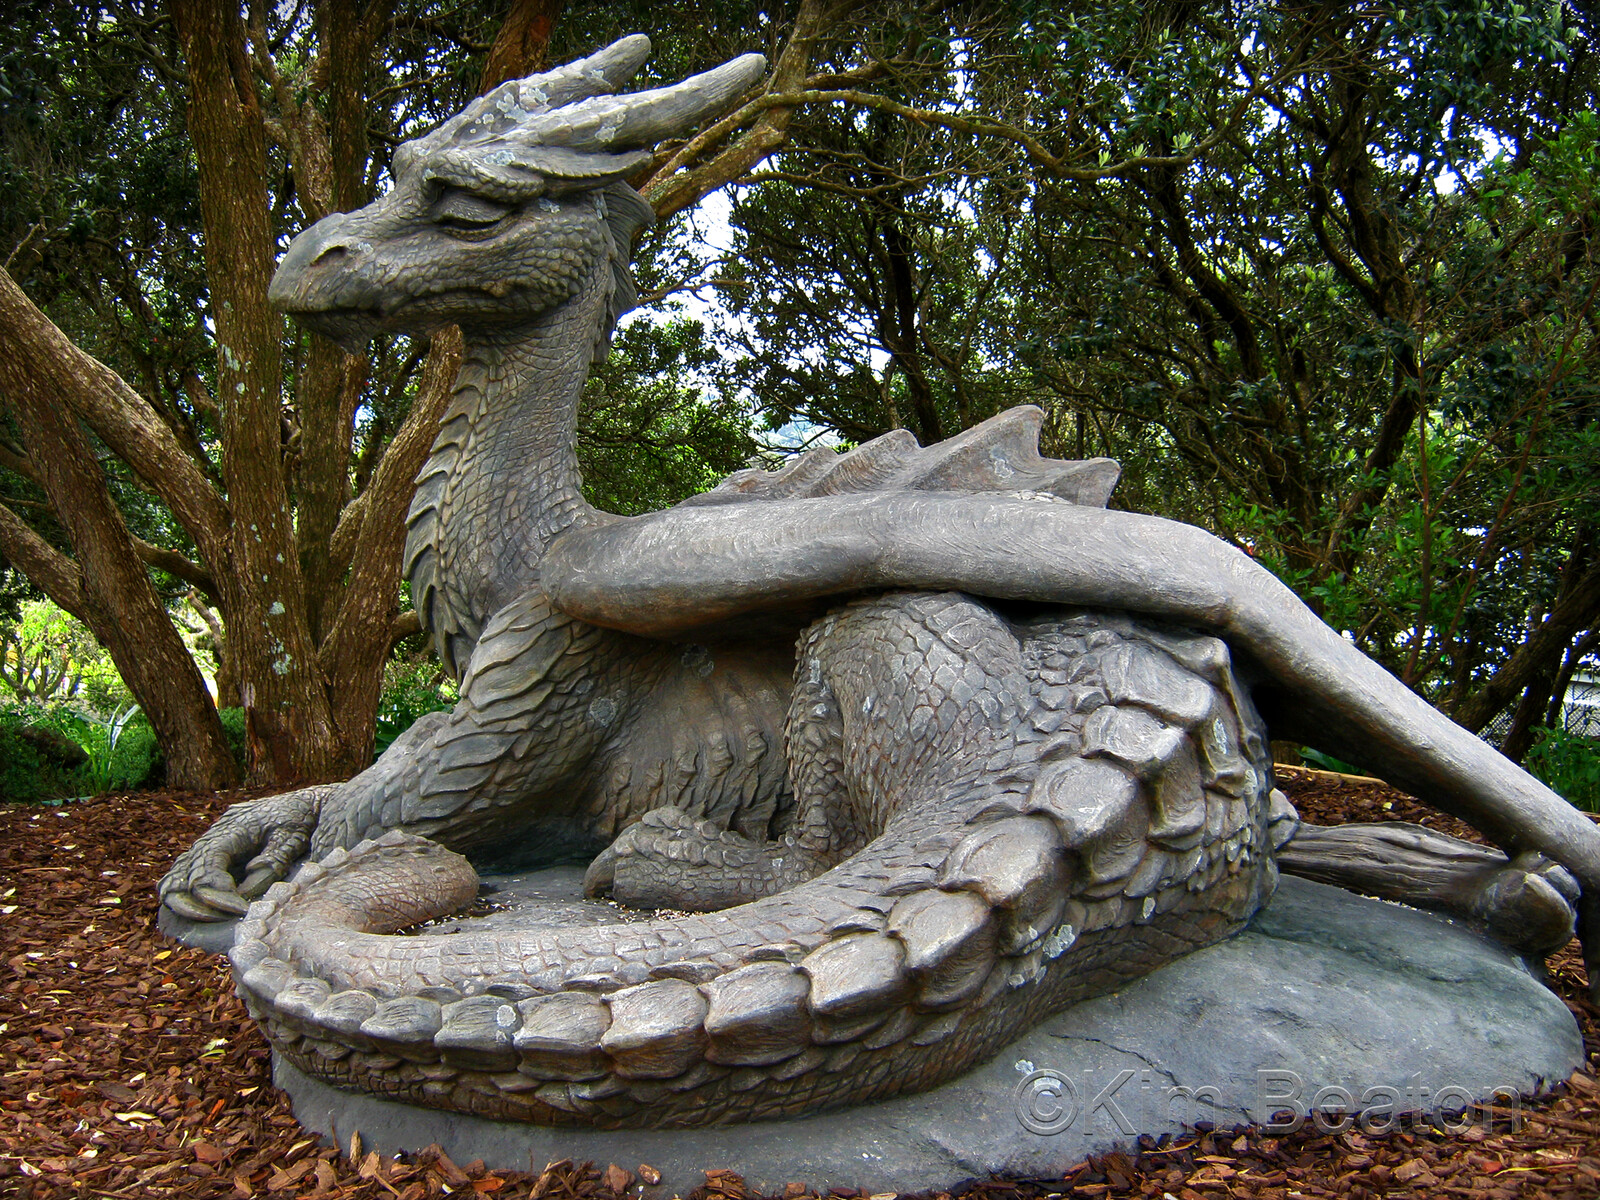 A lifesize gentle, elderly dragon sculpture, basking in a warm patch of sun.